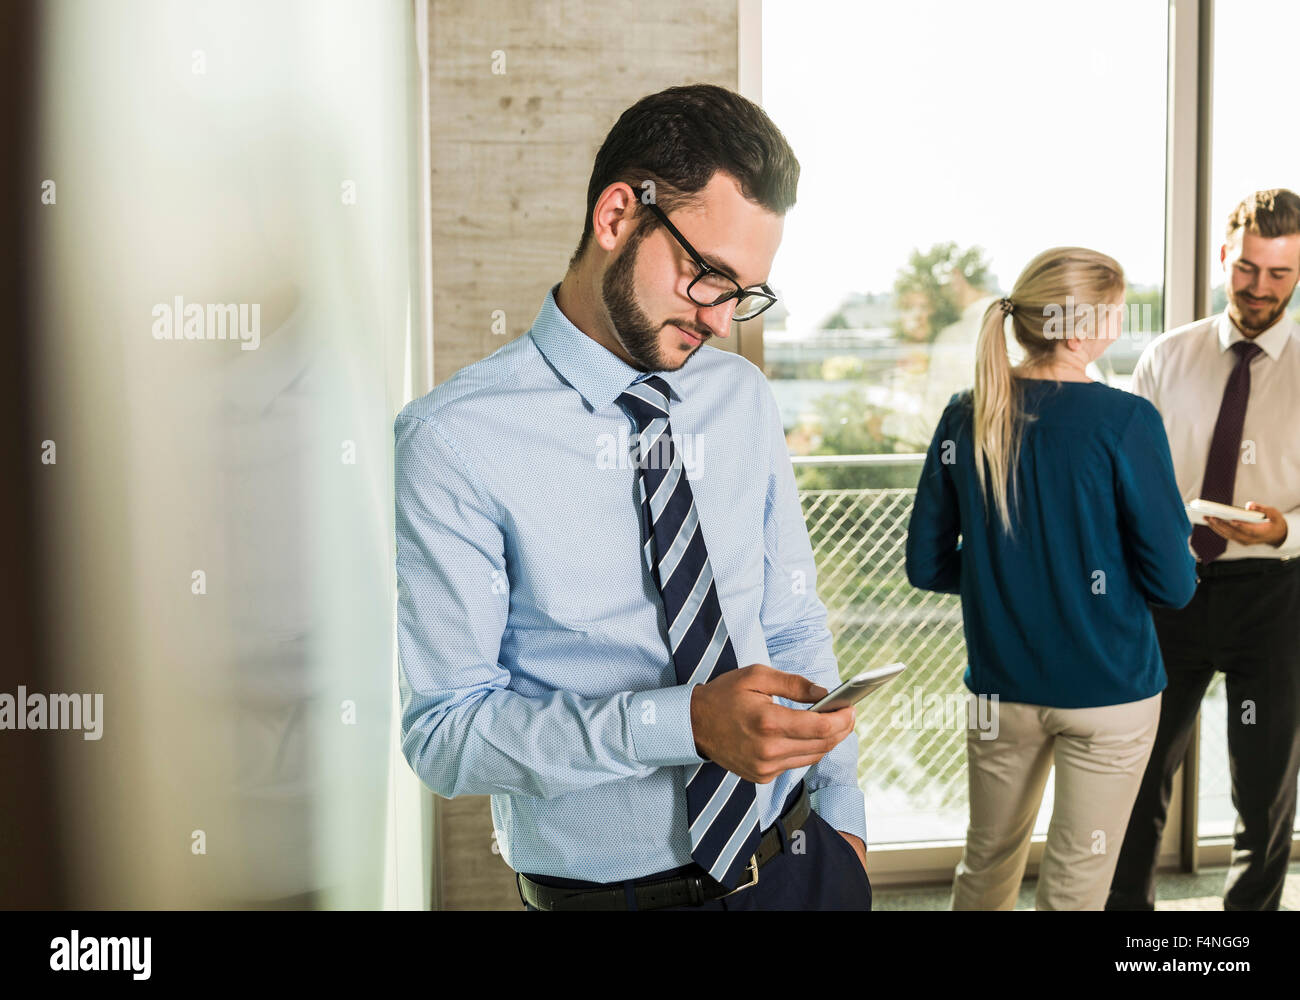 Businessman looking at smartphone with colleagues in background Stock Photo